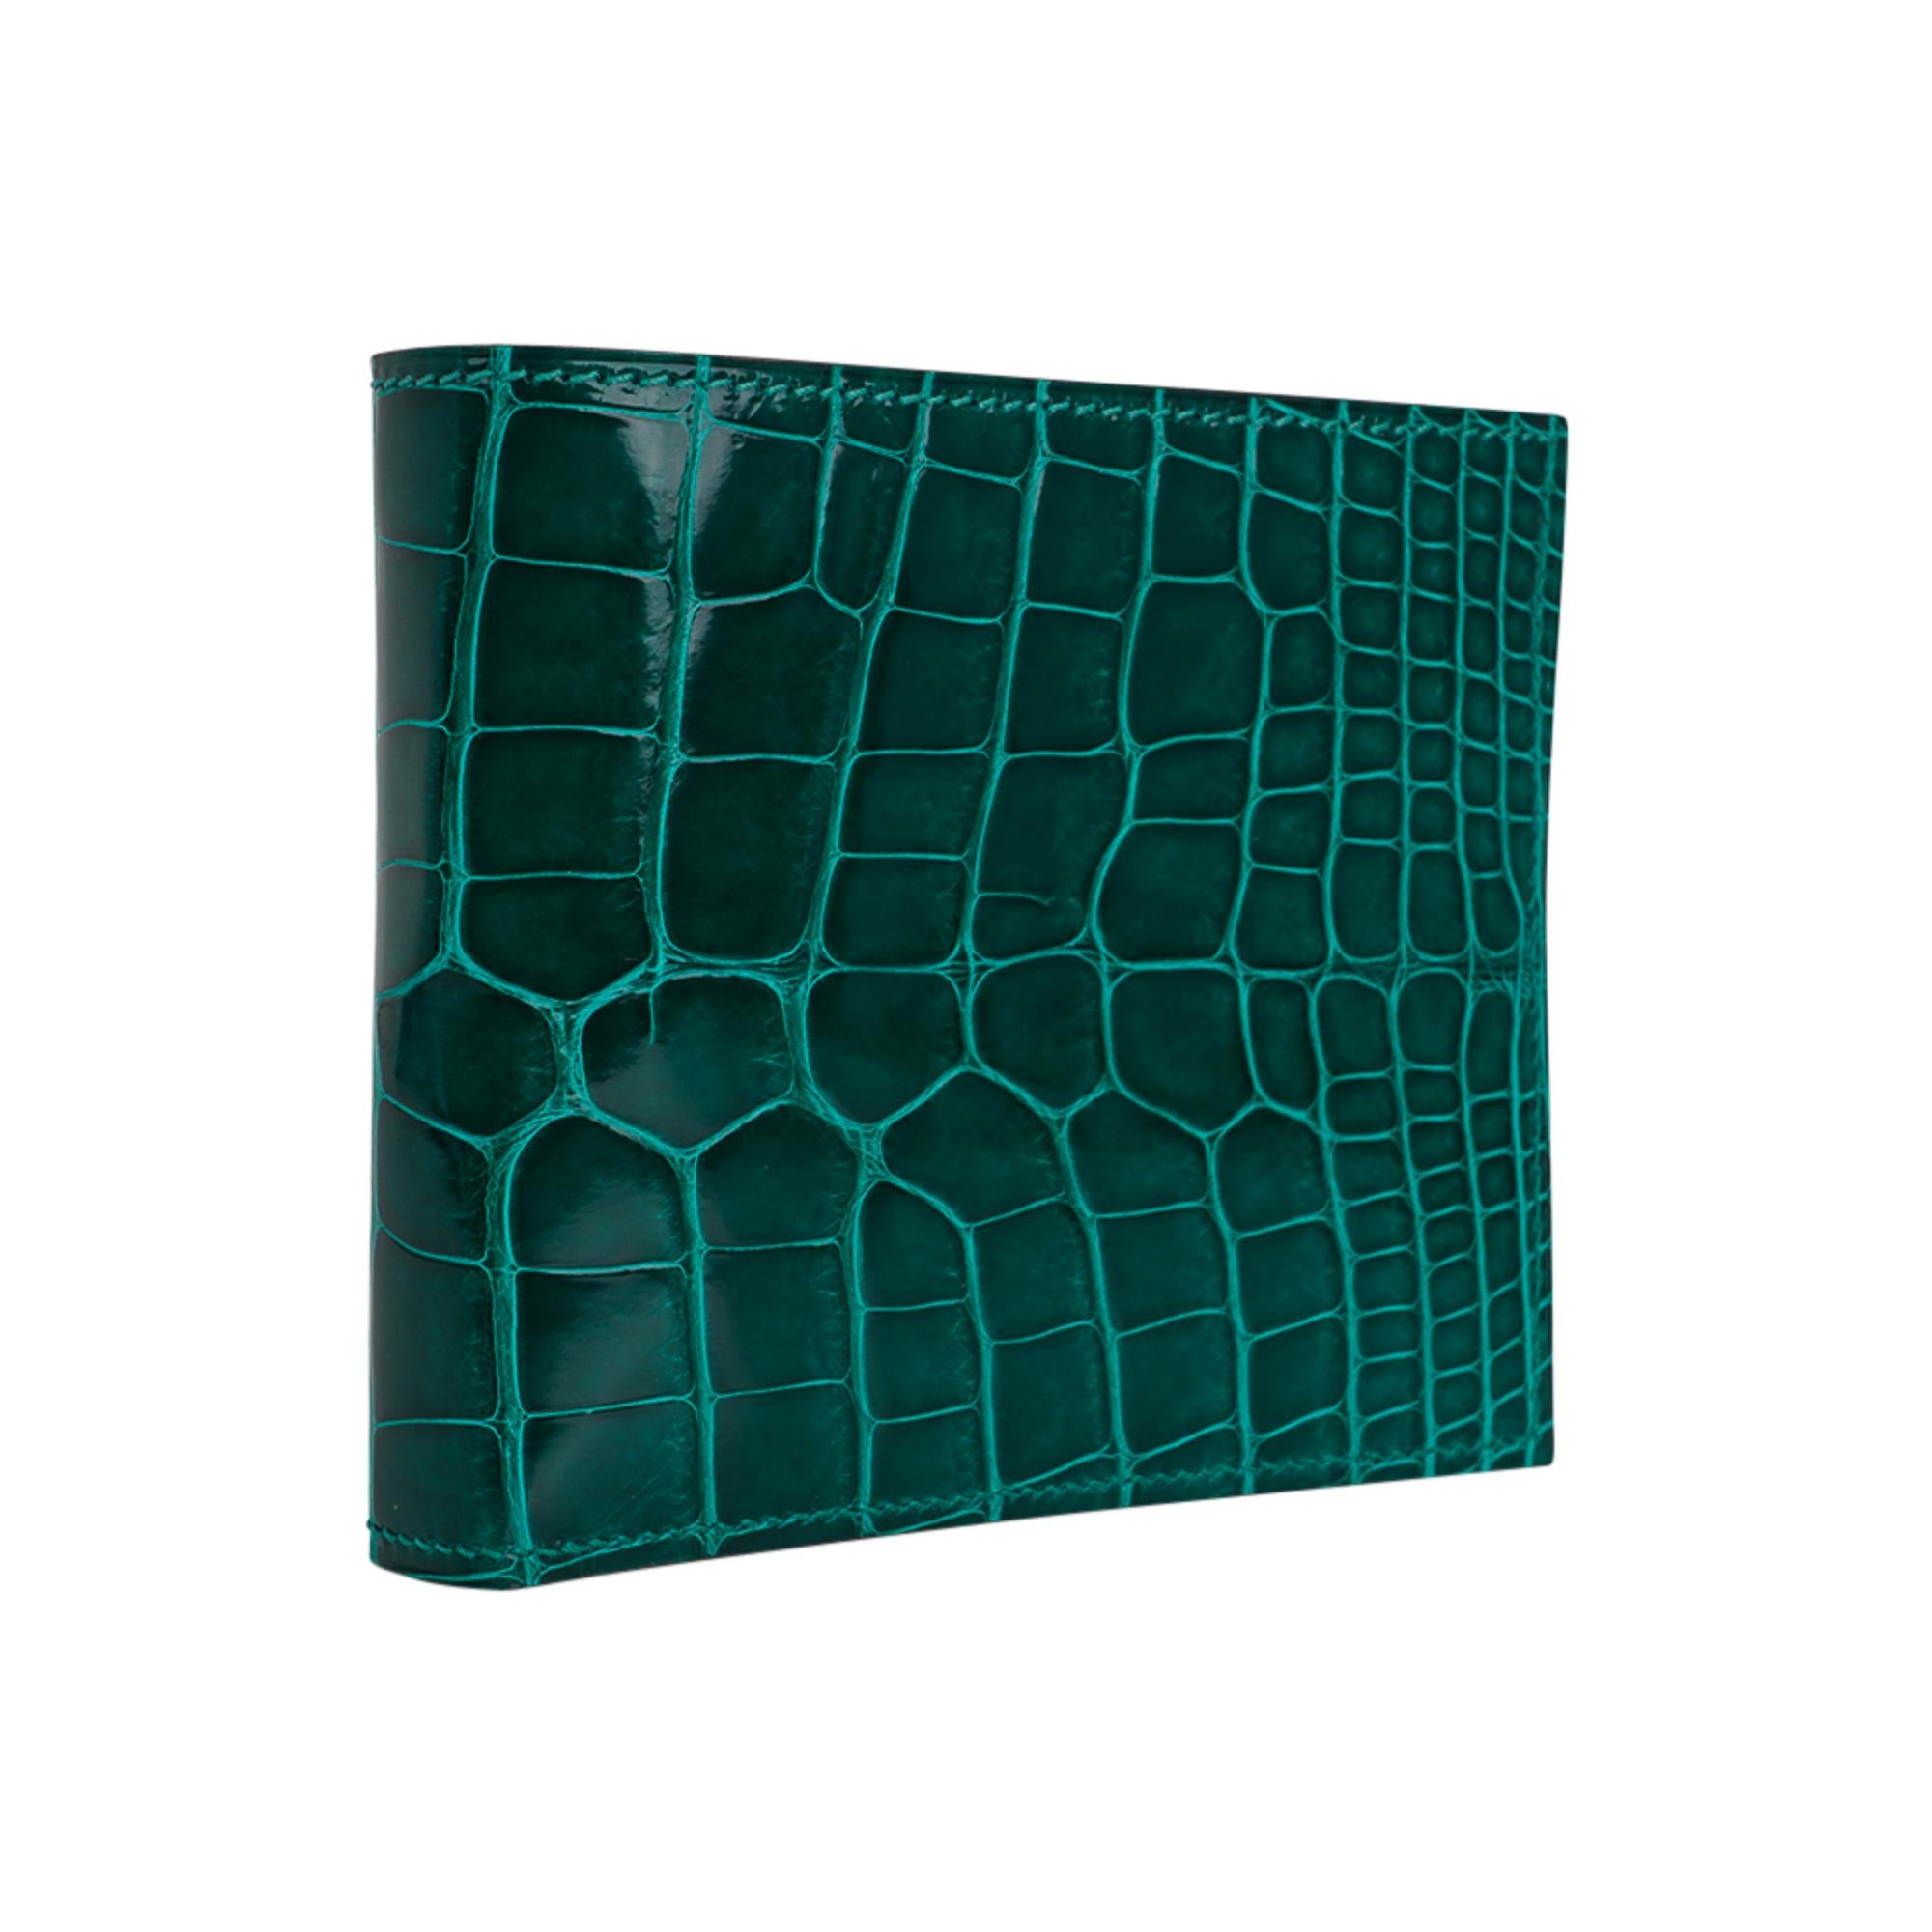 Mightychic offers a guaranteed authentic Hermes Men's MC2 Copernic compact bi-fold wallet featured in coveted jewel toned Emerald Alligator.
Interior is chevre with eight credit card slots, two flat pockets and one paper money slot.
Sleek clean